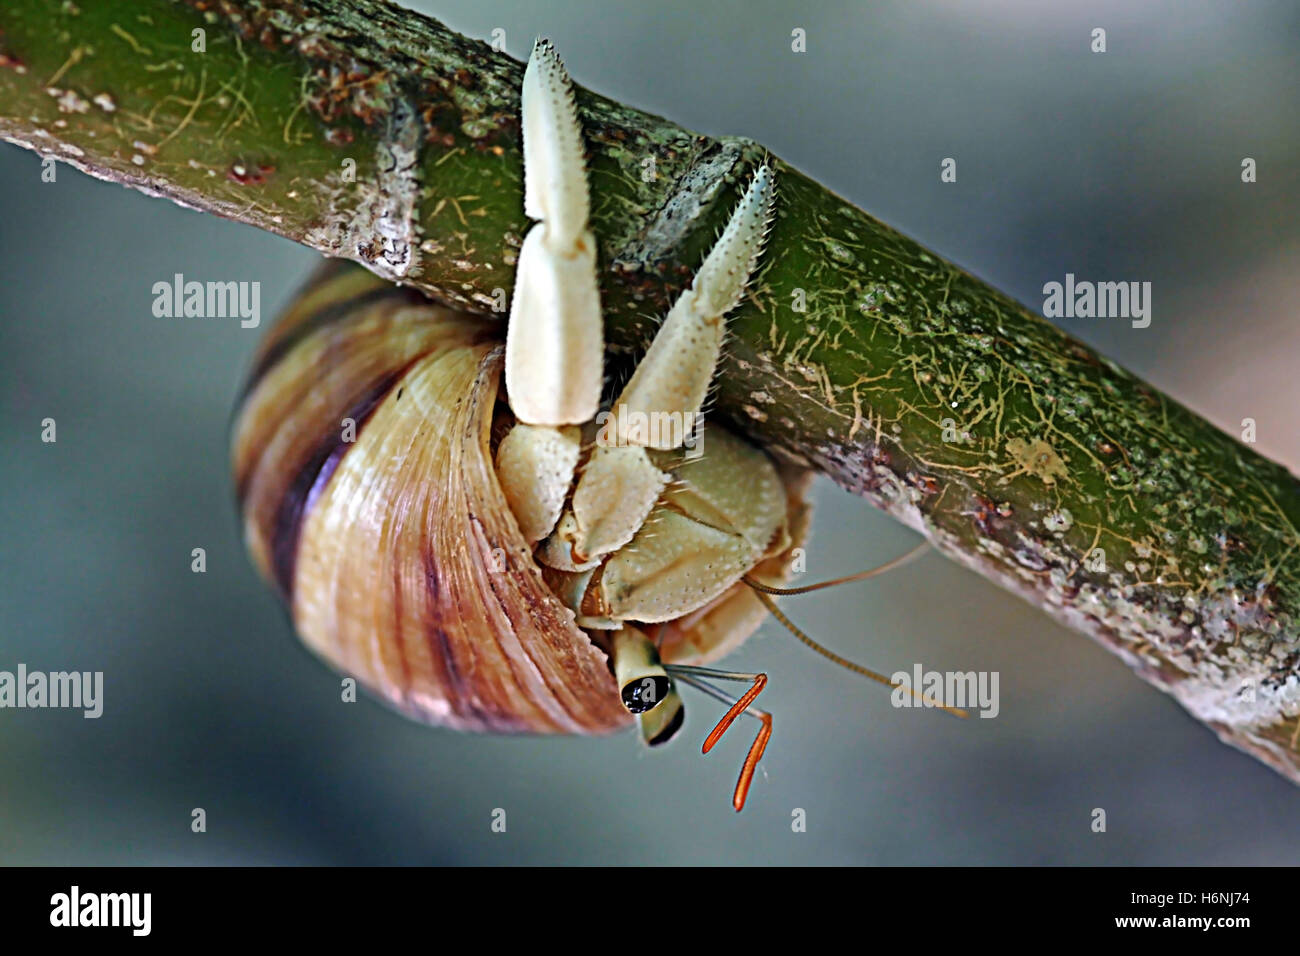 hermit crab upside down on a tree branch Stock Photo